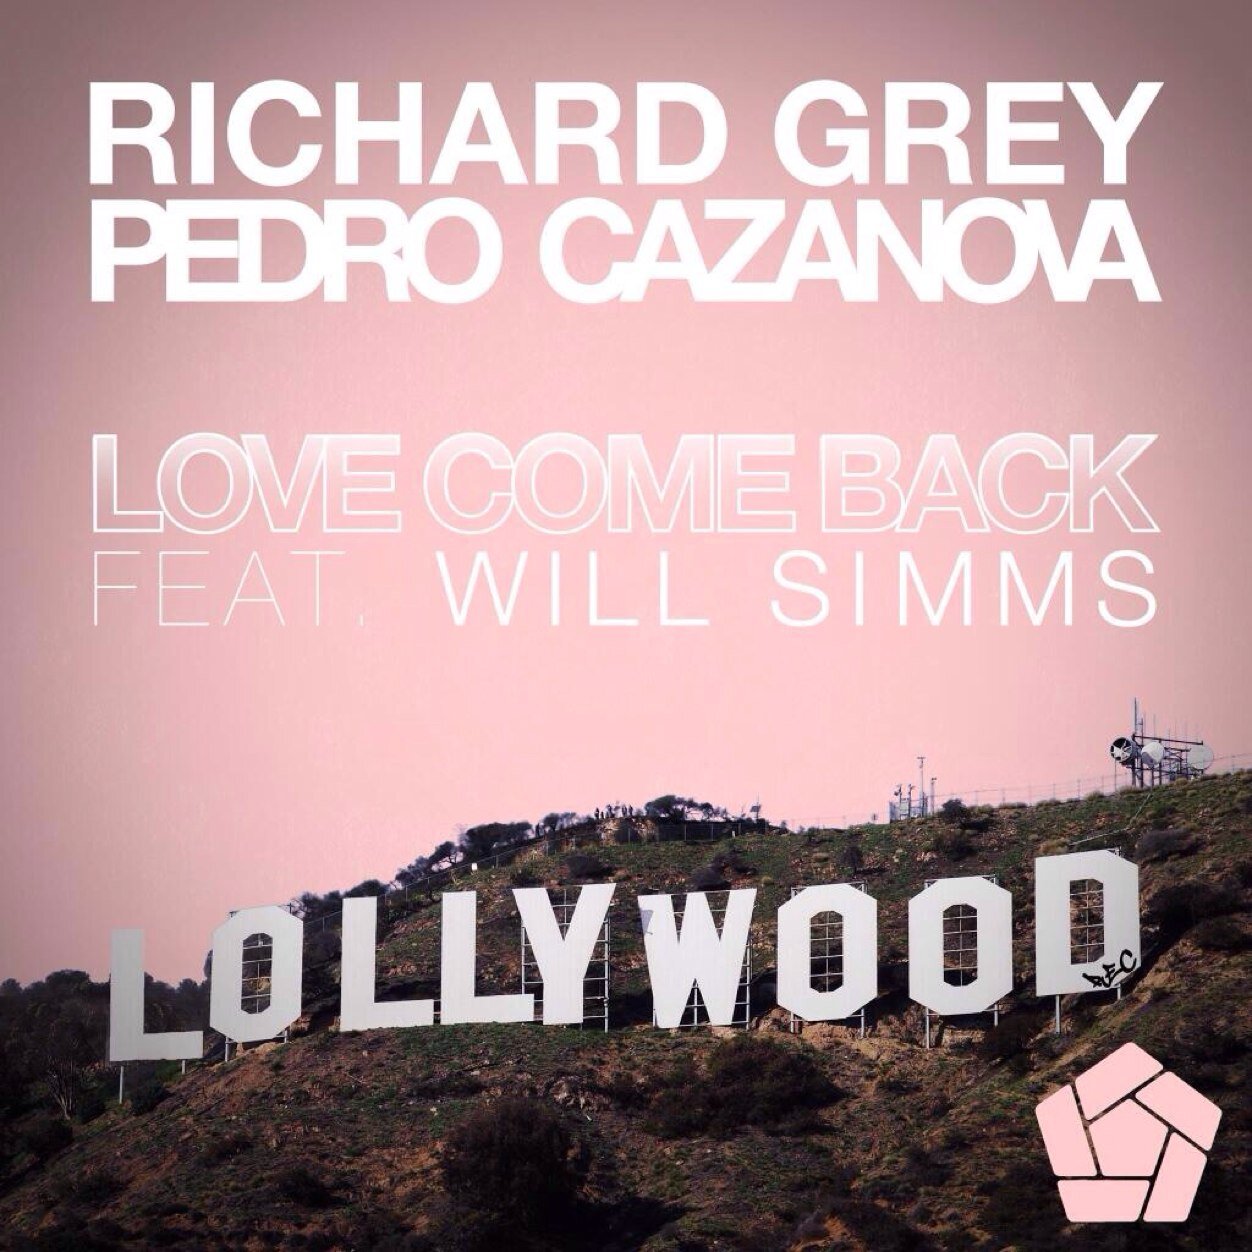 We promote @LollywoodRec ★ OUT NOW! @Richard_Grey & @PedroCazanova feat. @WillSimmsMusic - Love Come Back http://t.co/AOKgLFfV45